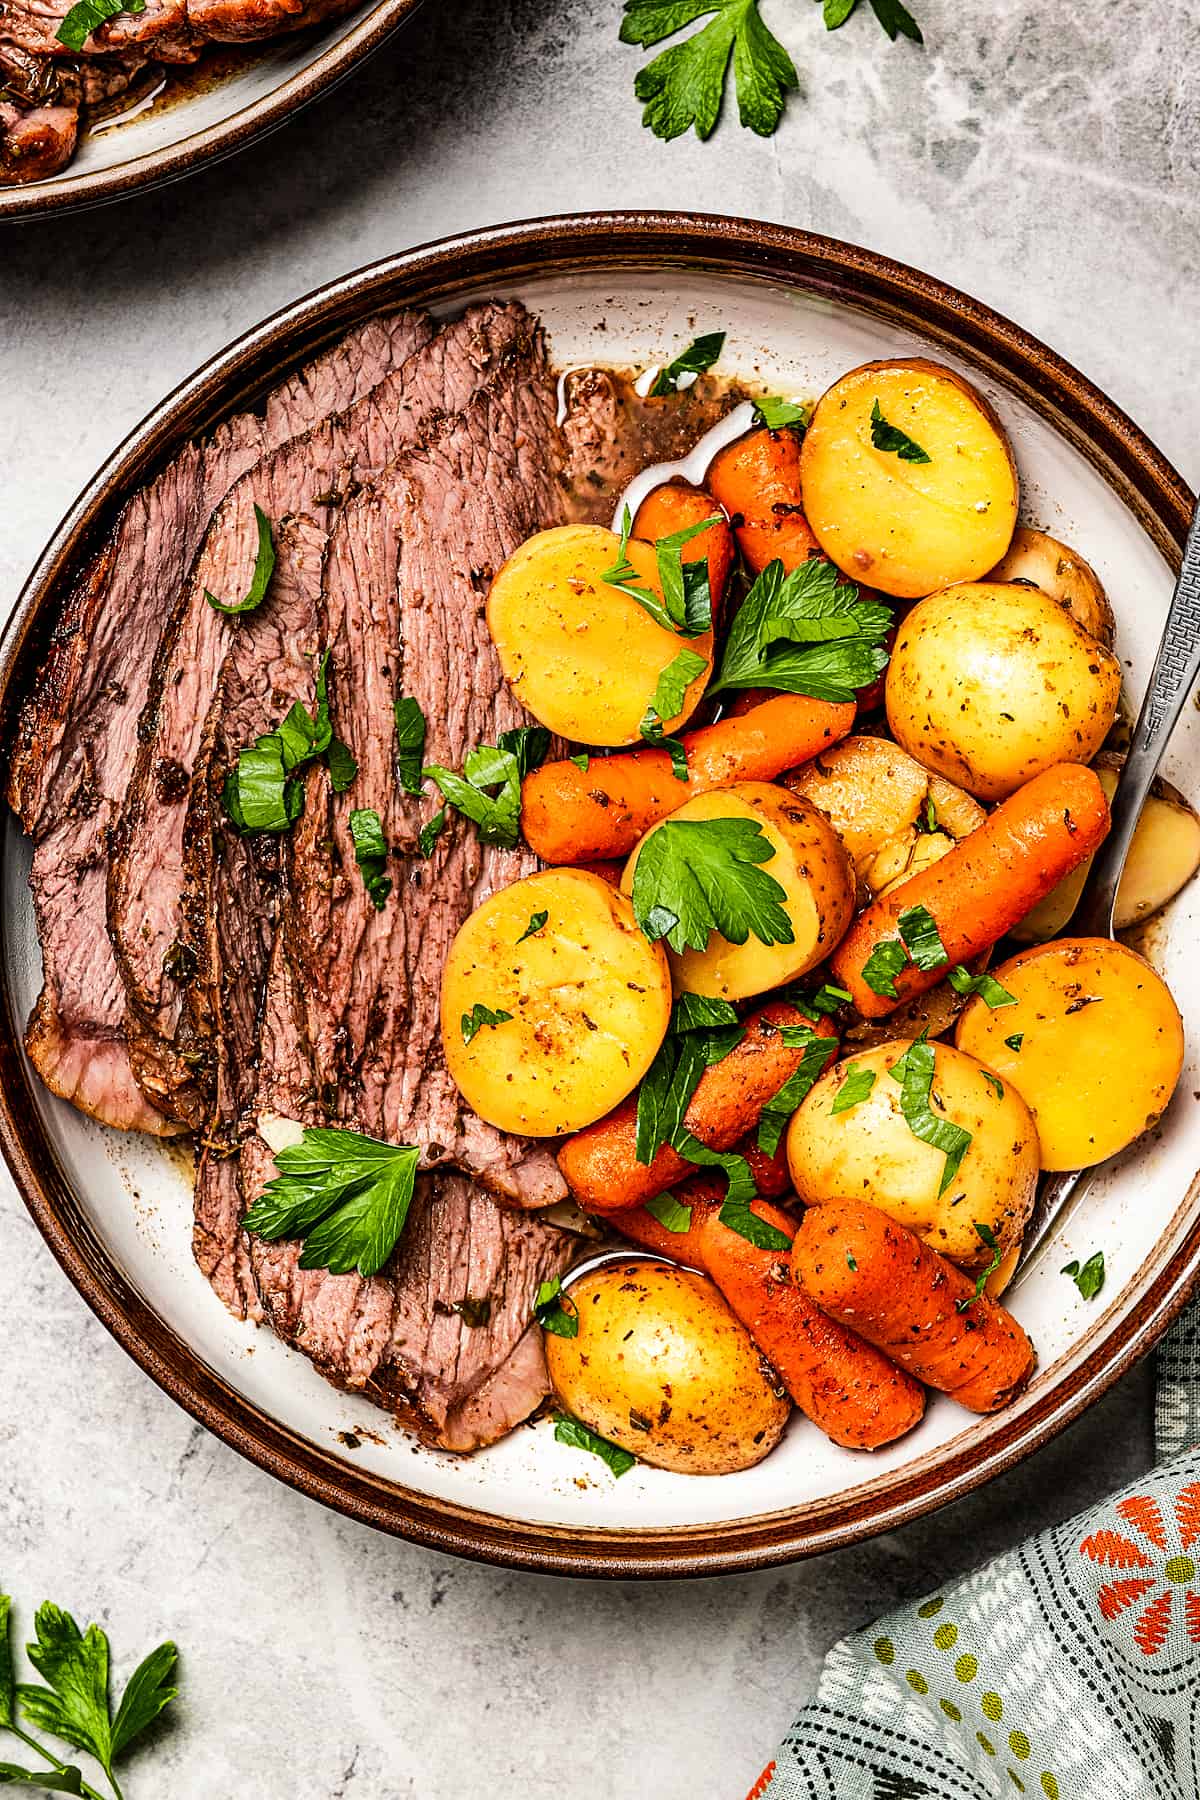 Sliced roast beef with potatoes and carrots on a dinner plate.